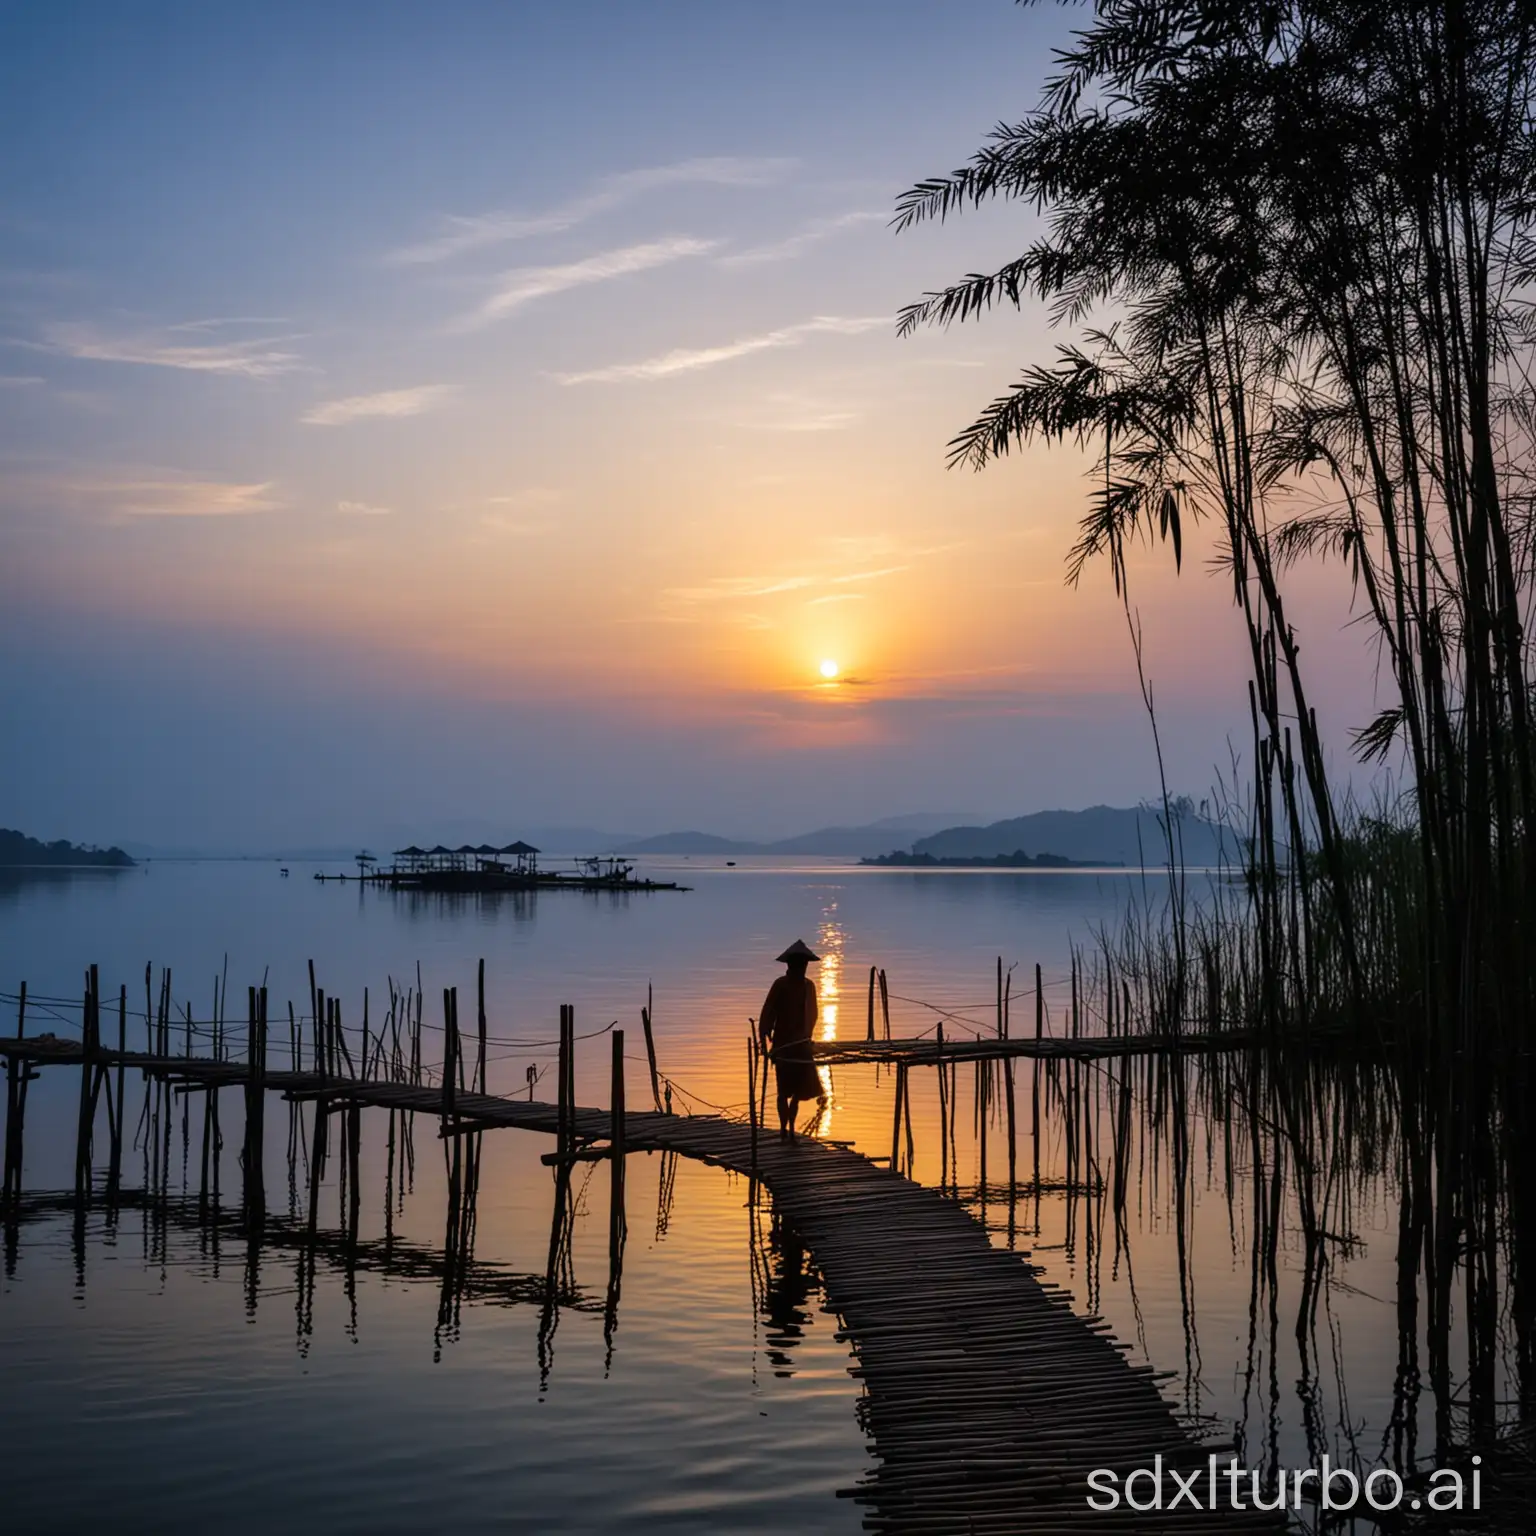 create an image of a fisherman walking on a bamboo wharf next to a body of water, by Sudip Roy, pixabay contest winner, romanticism, blue hour sky, bamboo vine bridge silhouette over lake, fishing village, vibrant composition and color